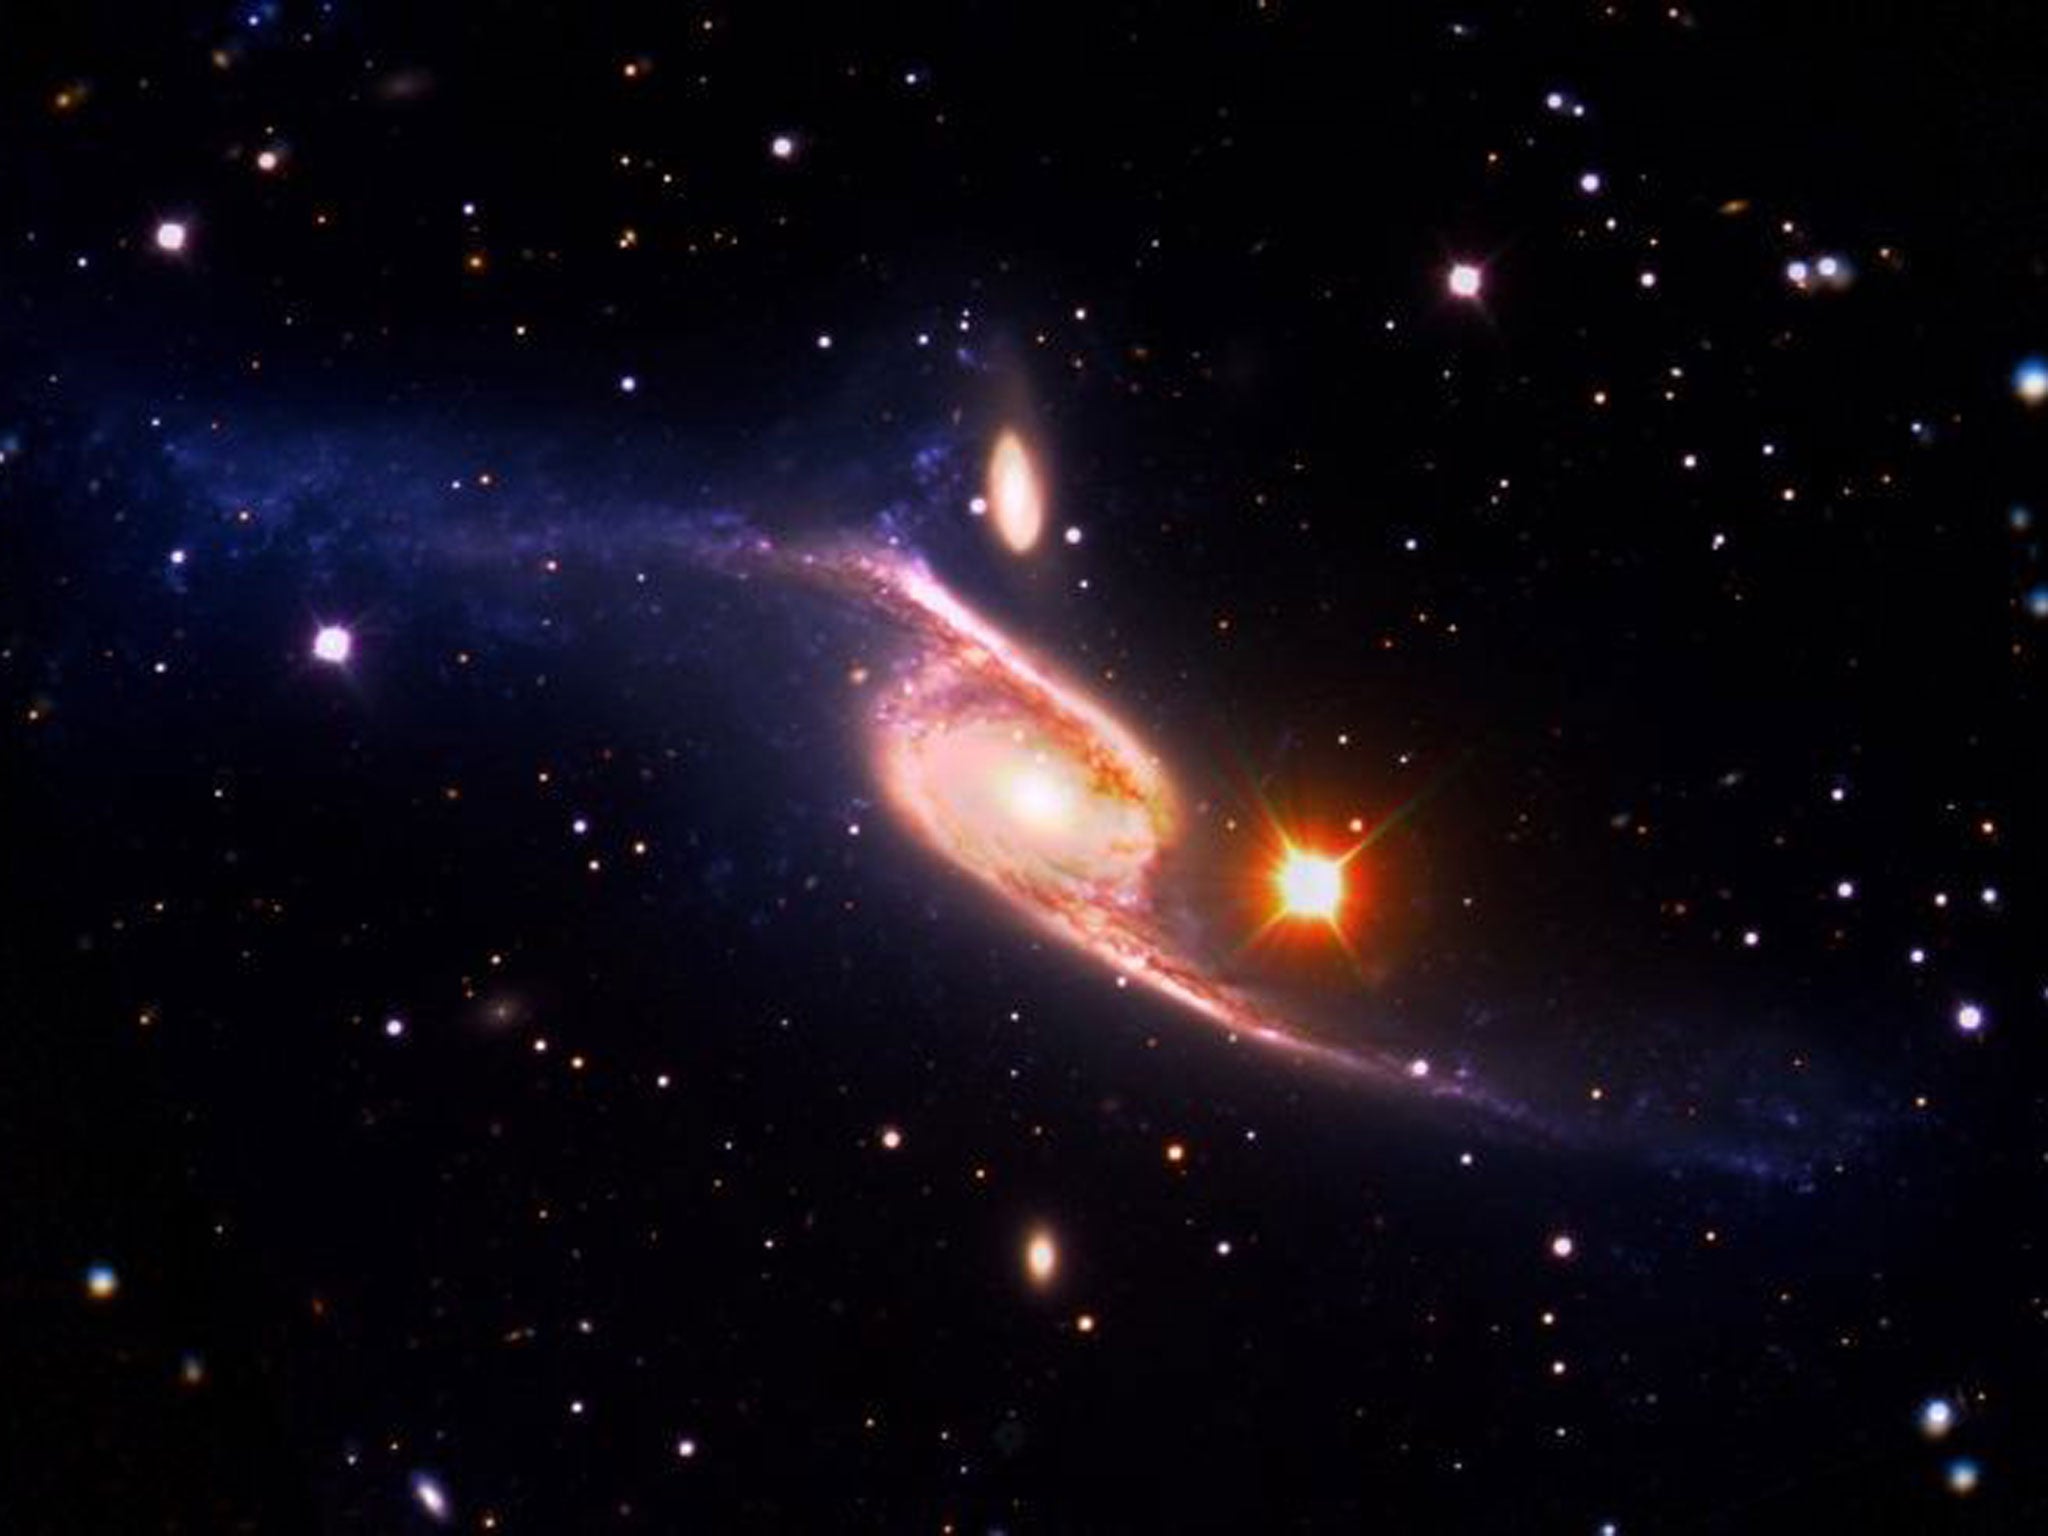 The barred spiral galaxy NGC 6872 is pictured in this undated NASA handout photo